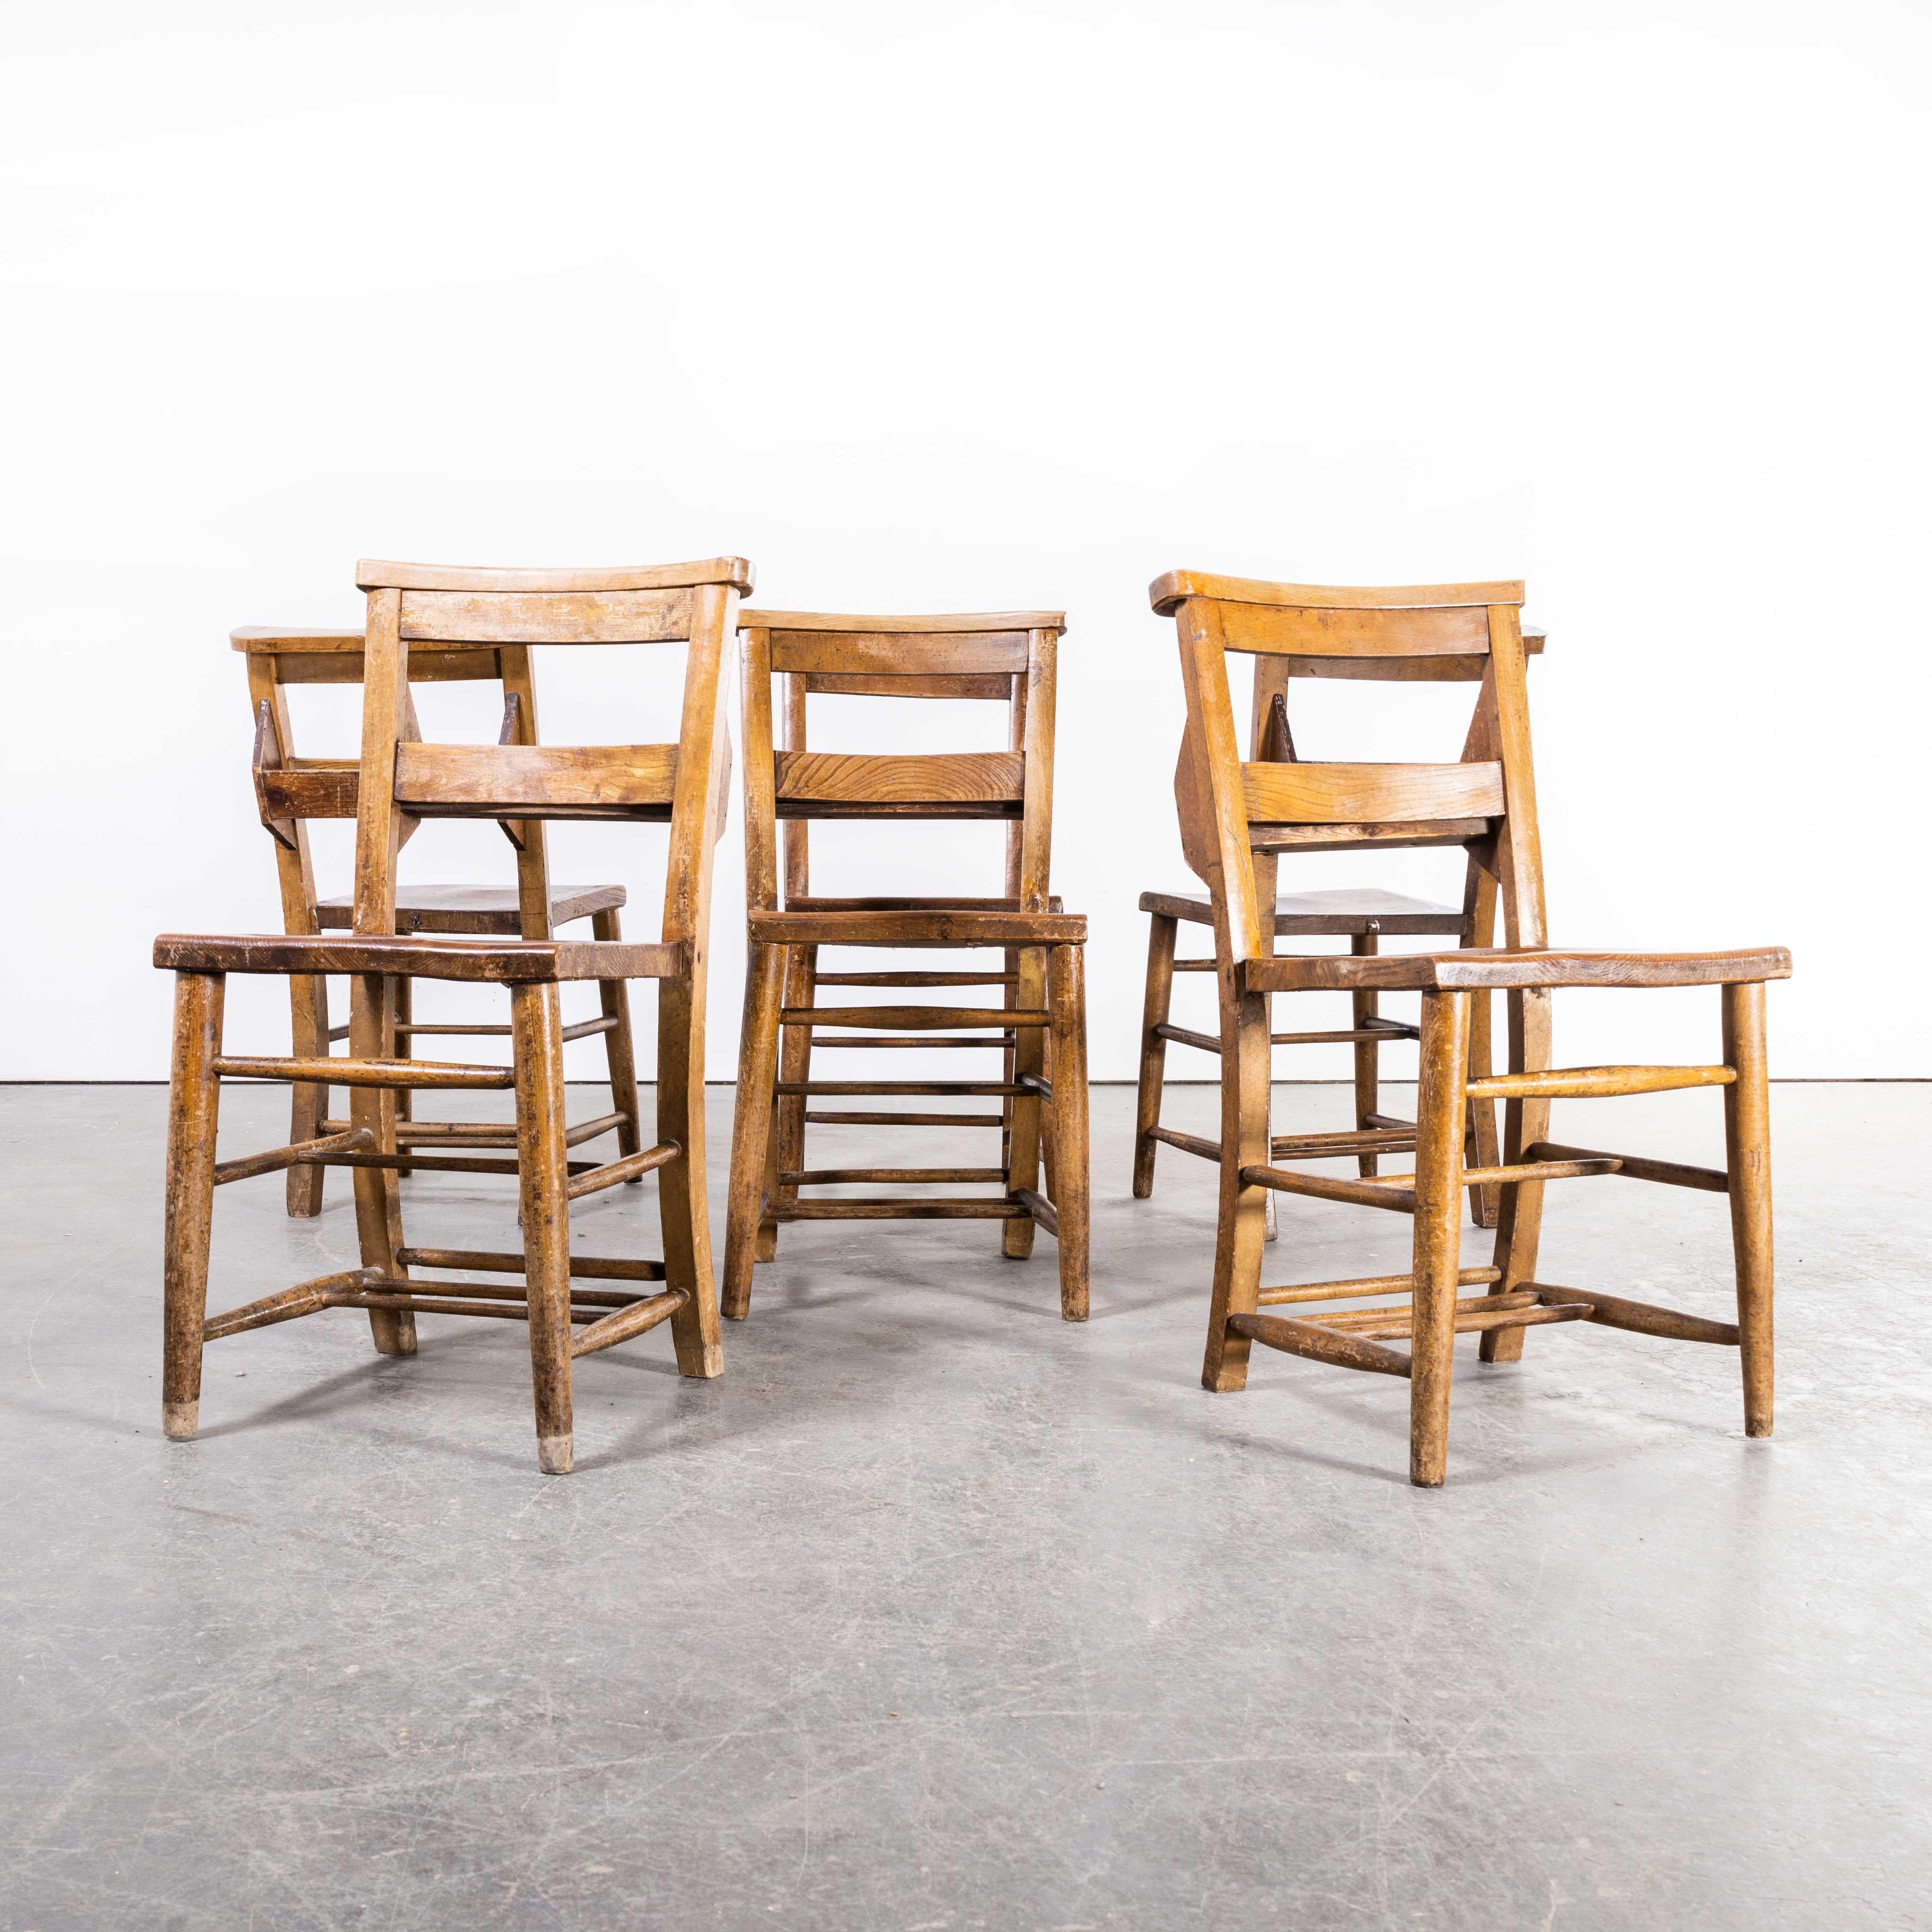 1940’s Ash Church – Chapel Dining Chairs – Set Of Six
1940’s Ash Church – Chapel Dining Chairs – Set Of Six. England has a wonderfully rich heritage for making chairs. At the height of production at the turn of the last century over 4500 chairs were